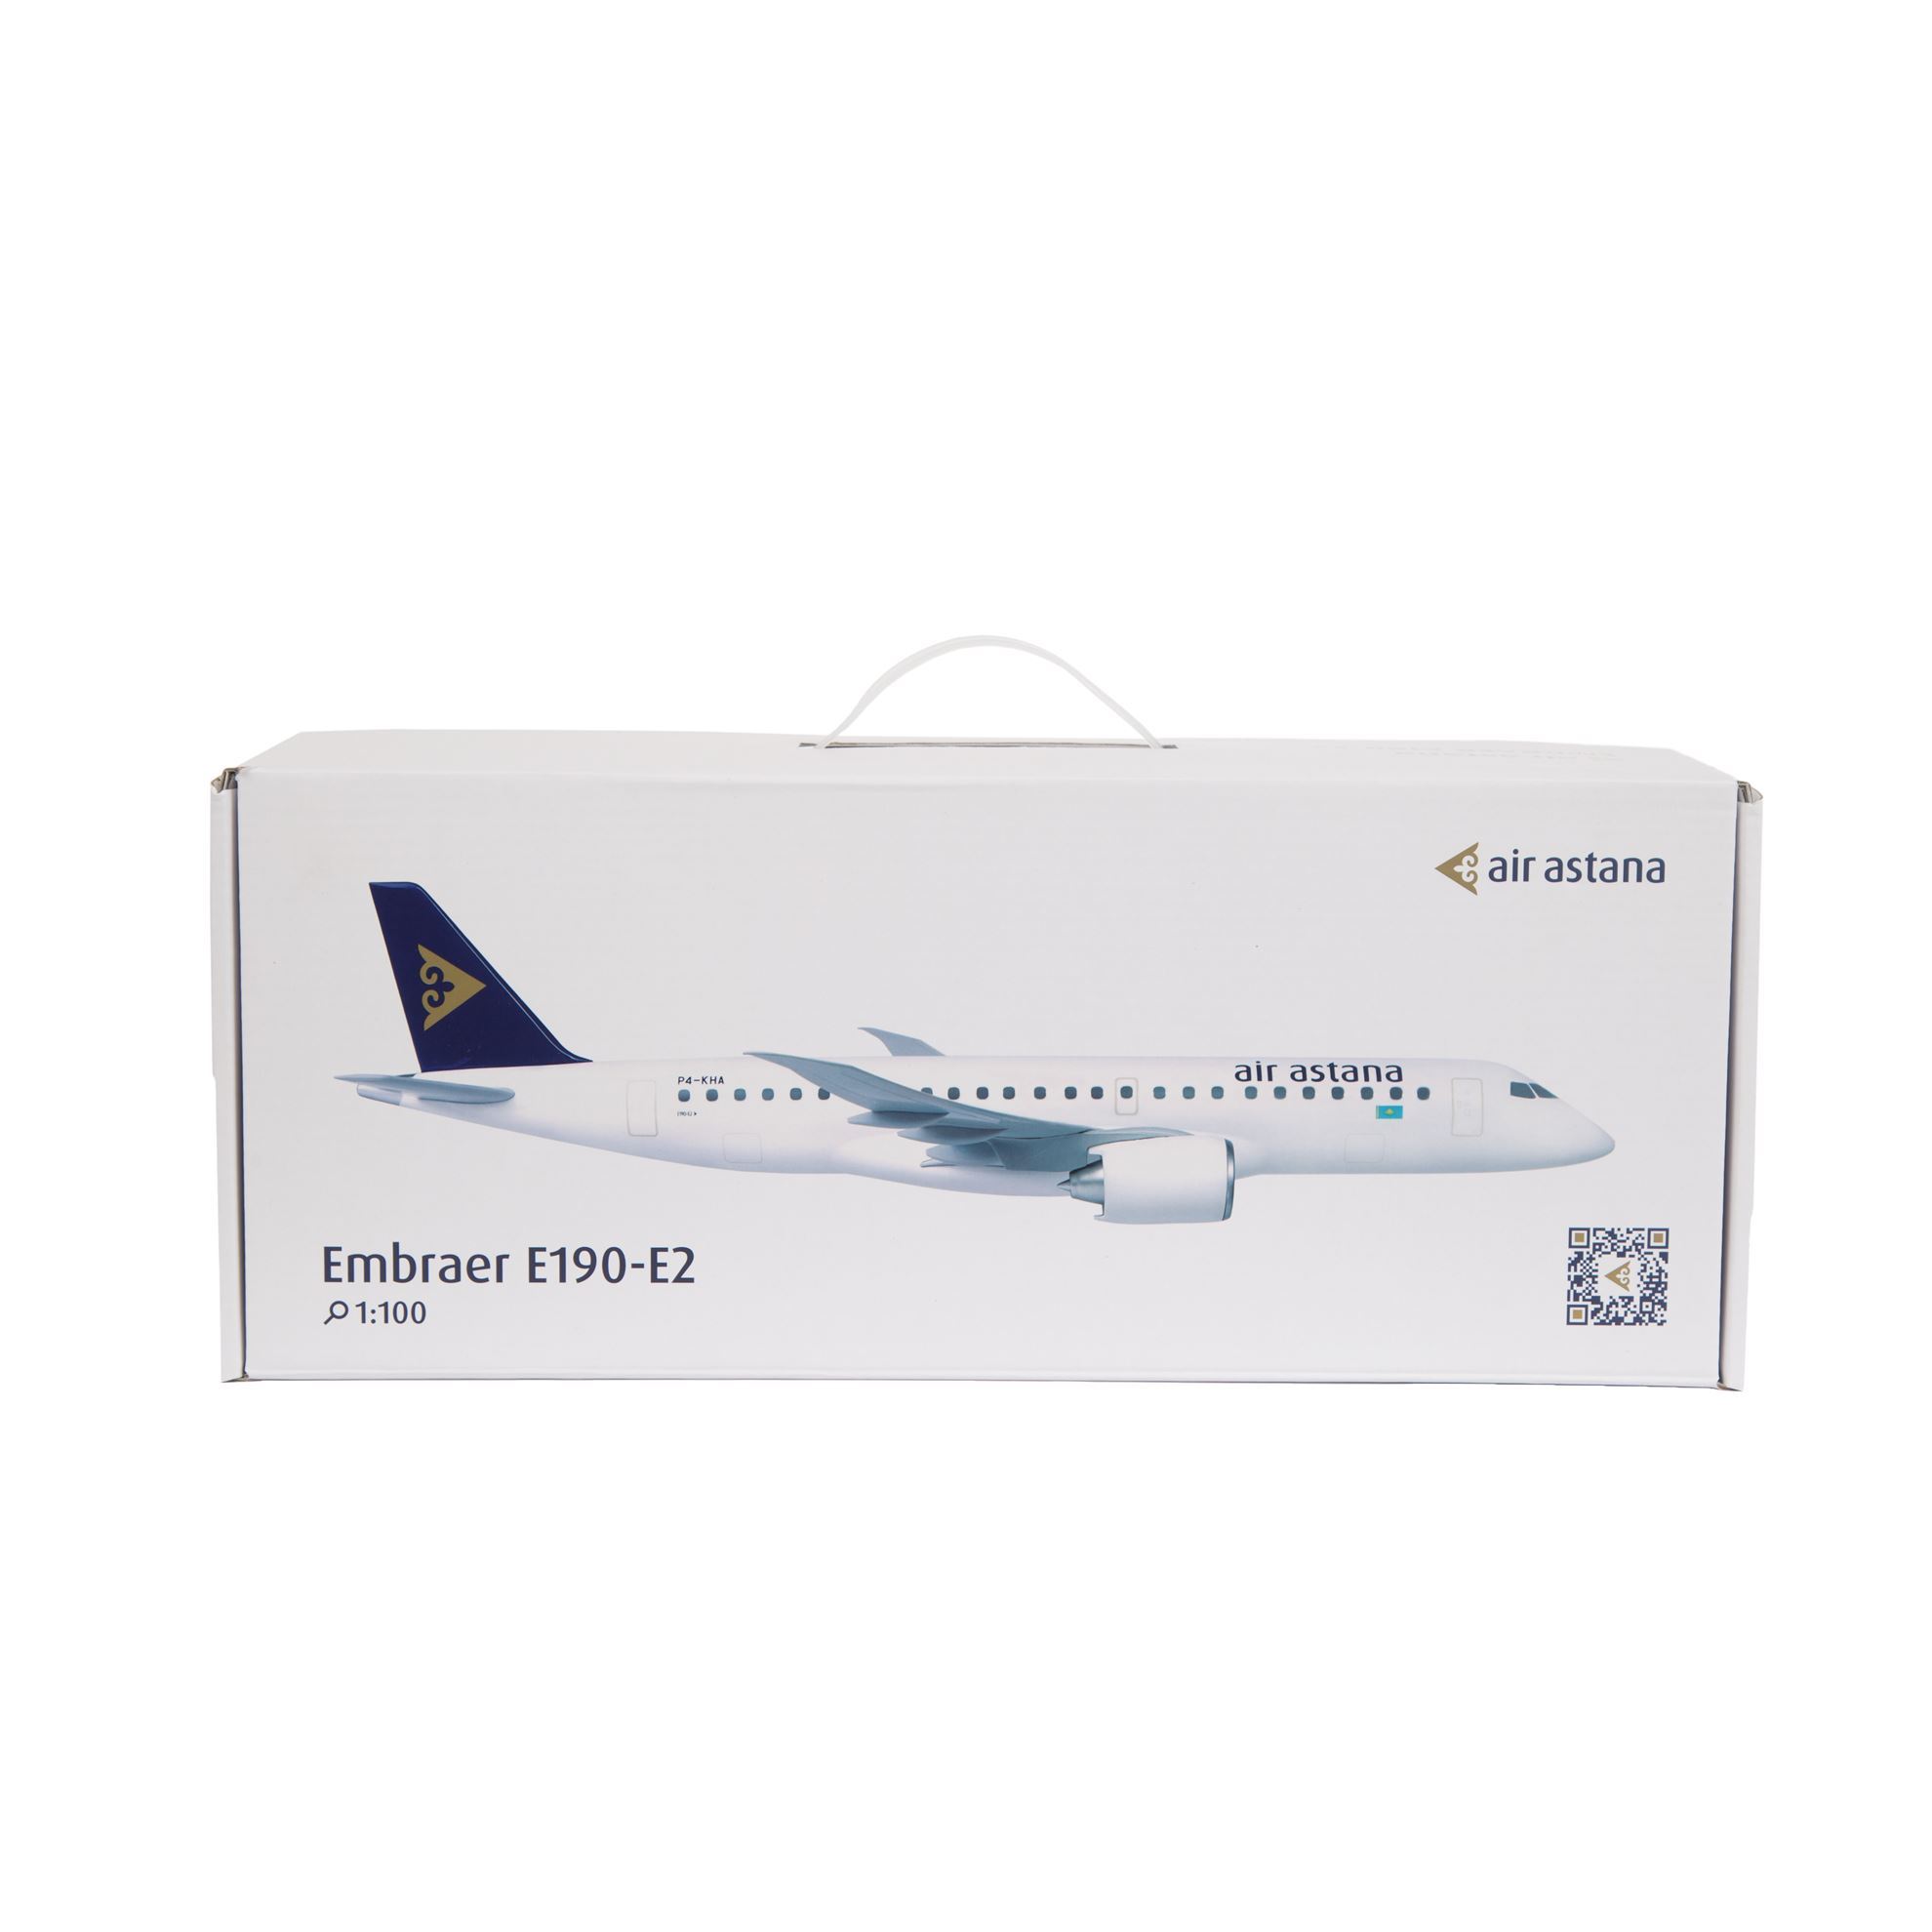 Picture of Embraer 190-E2 (1:100) aircraft model